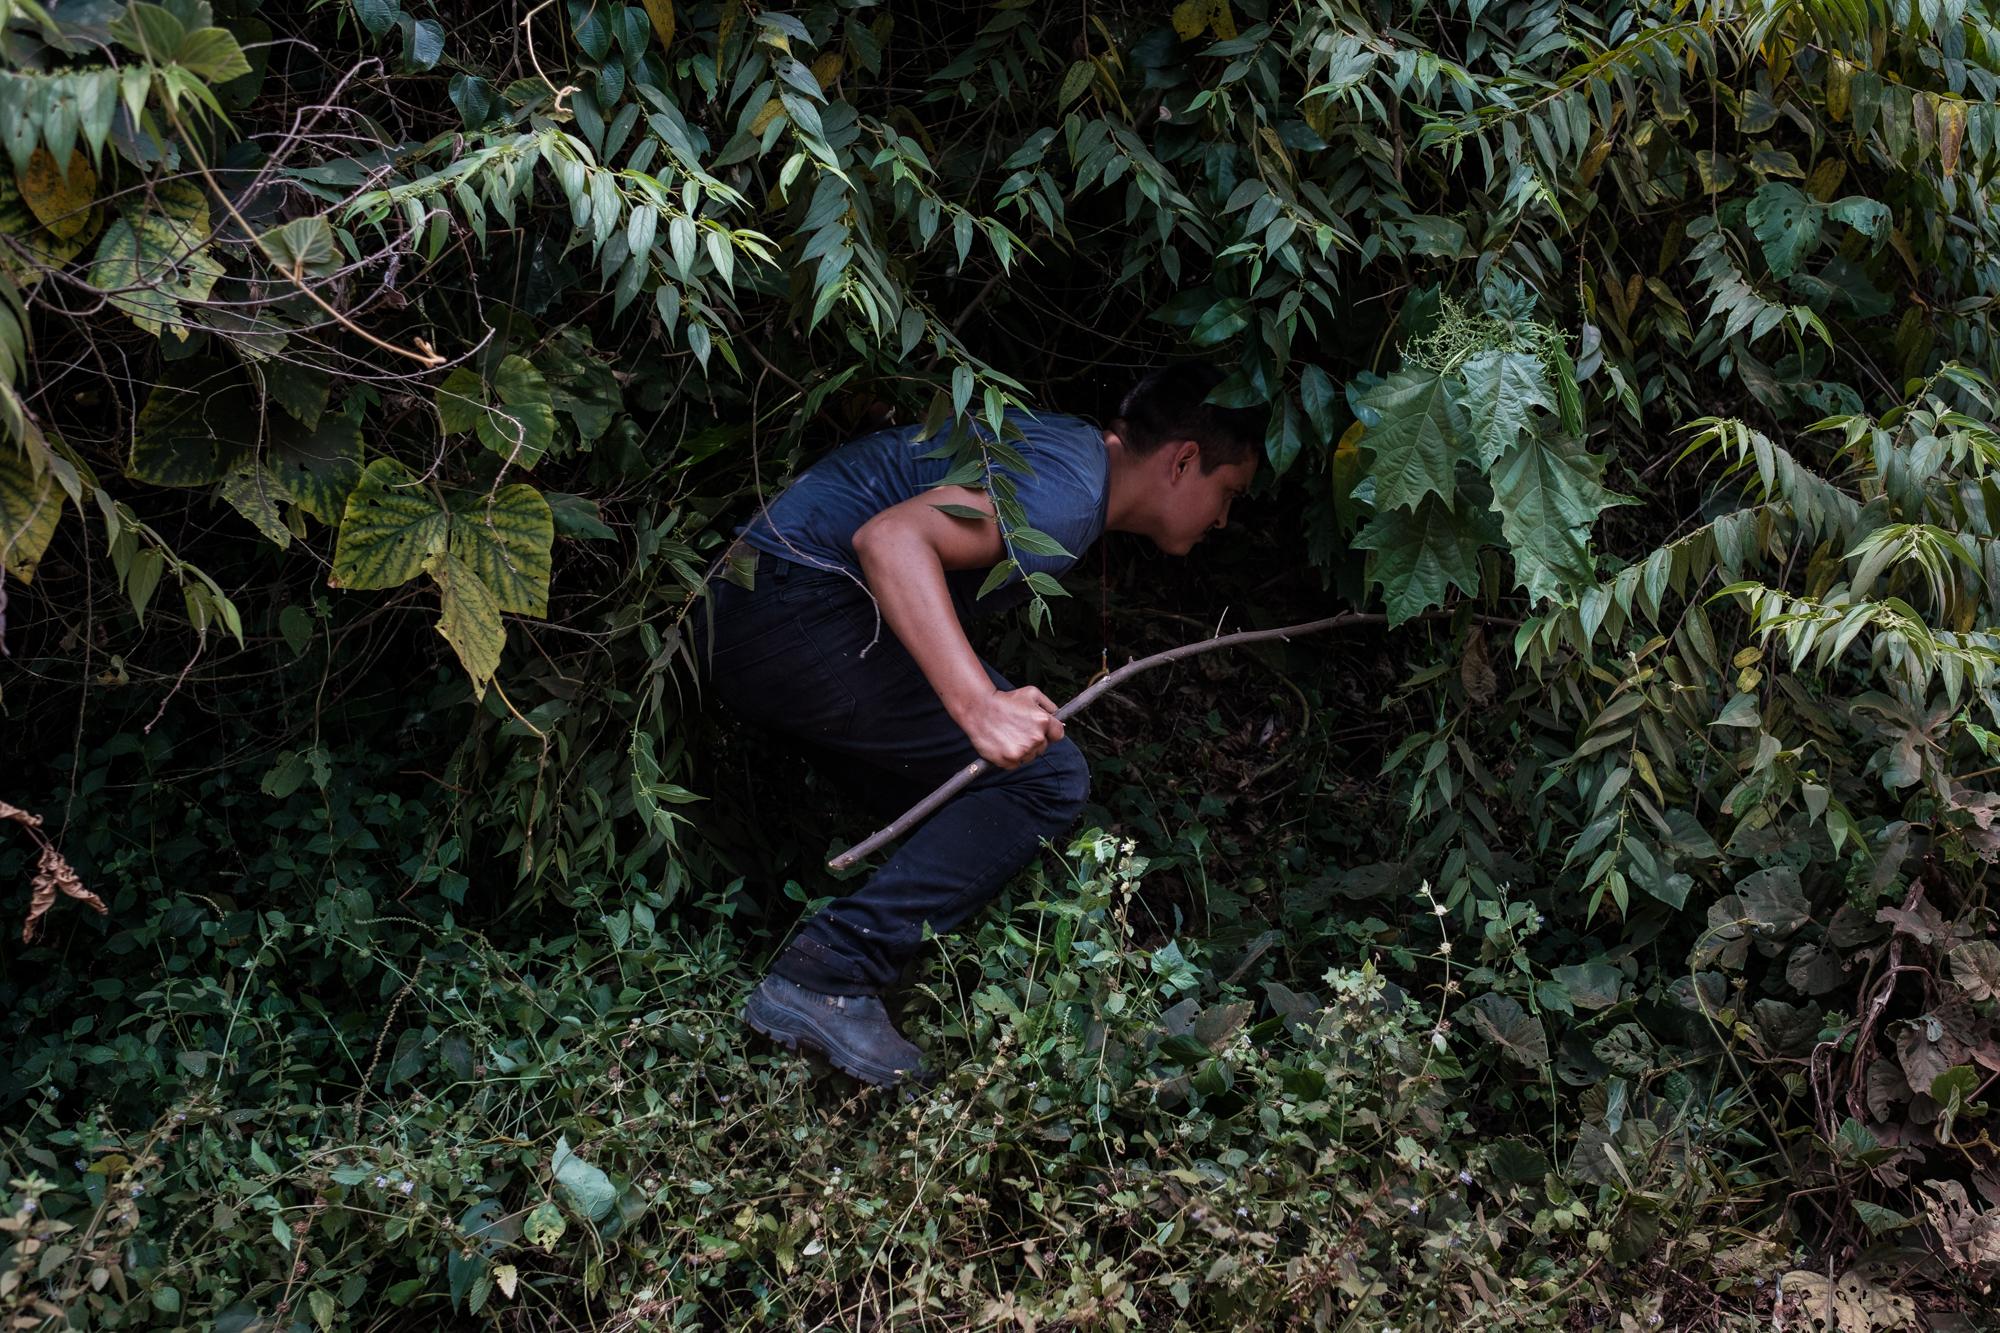 Indigenous law graduate Igor Curuaia, 27, looks for a snake in the woods near his community on the banks of the Xingu river near Altamira in...